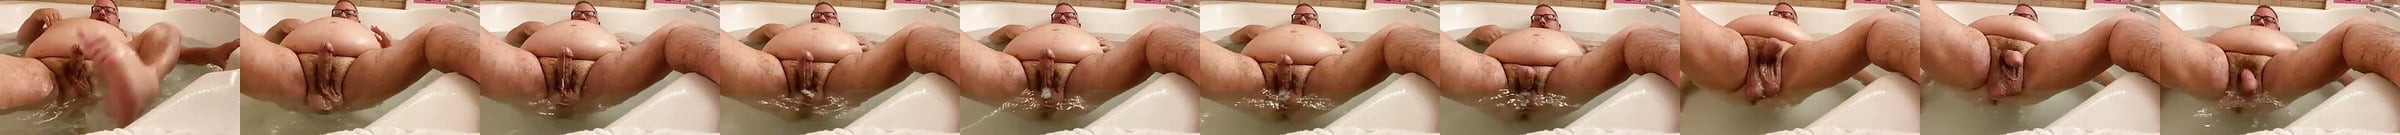 Fat Cock Daddy Free Fat Gay Hd Porn Video A3 Xhamster Xhamster